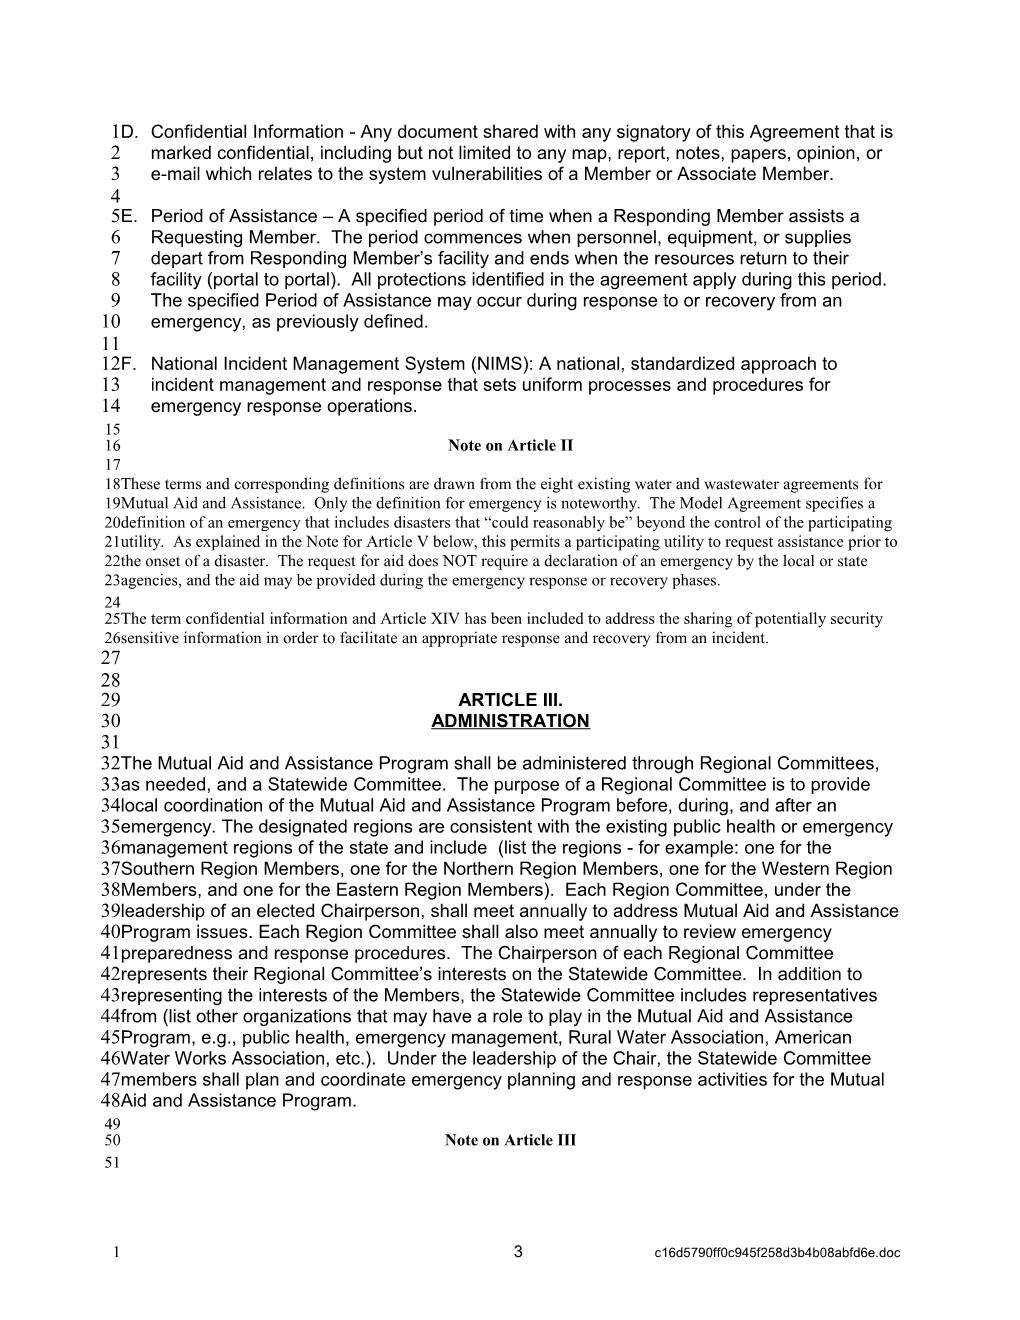 Modelmutual Aid and Assistance Agreement for Intrastate